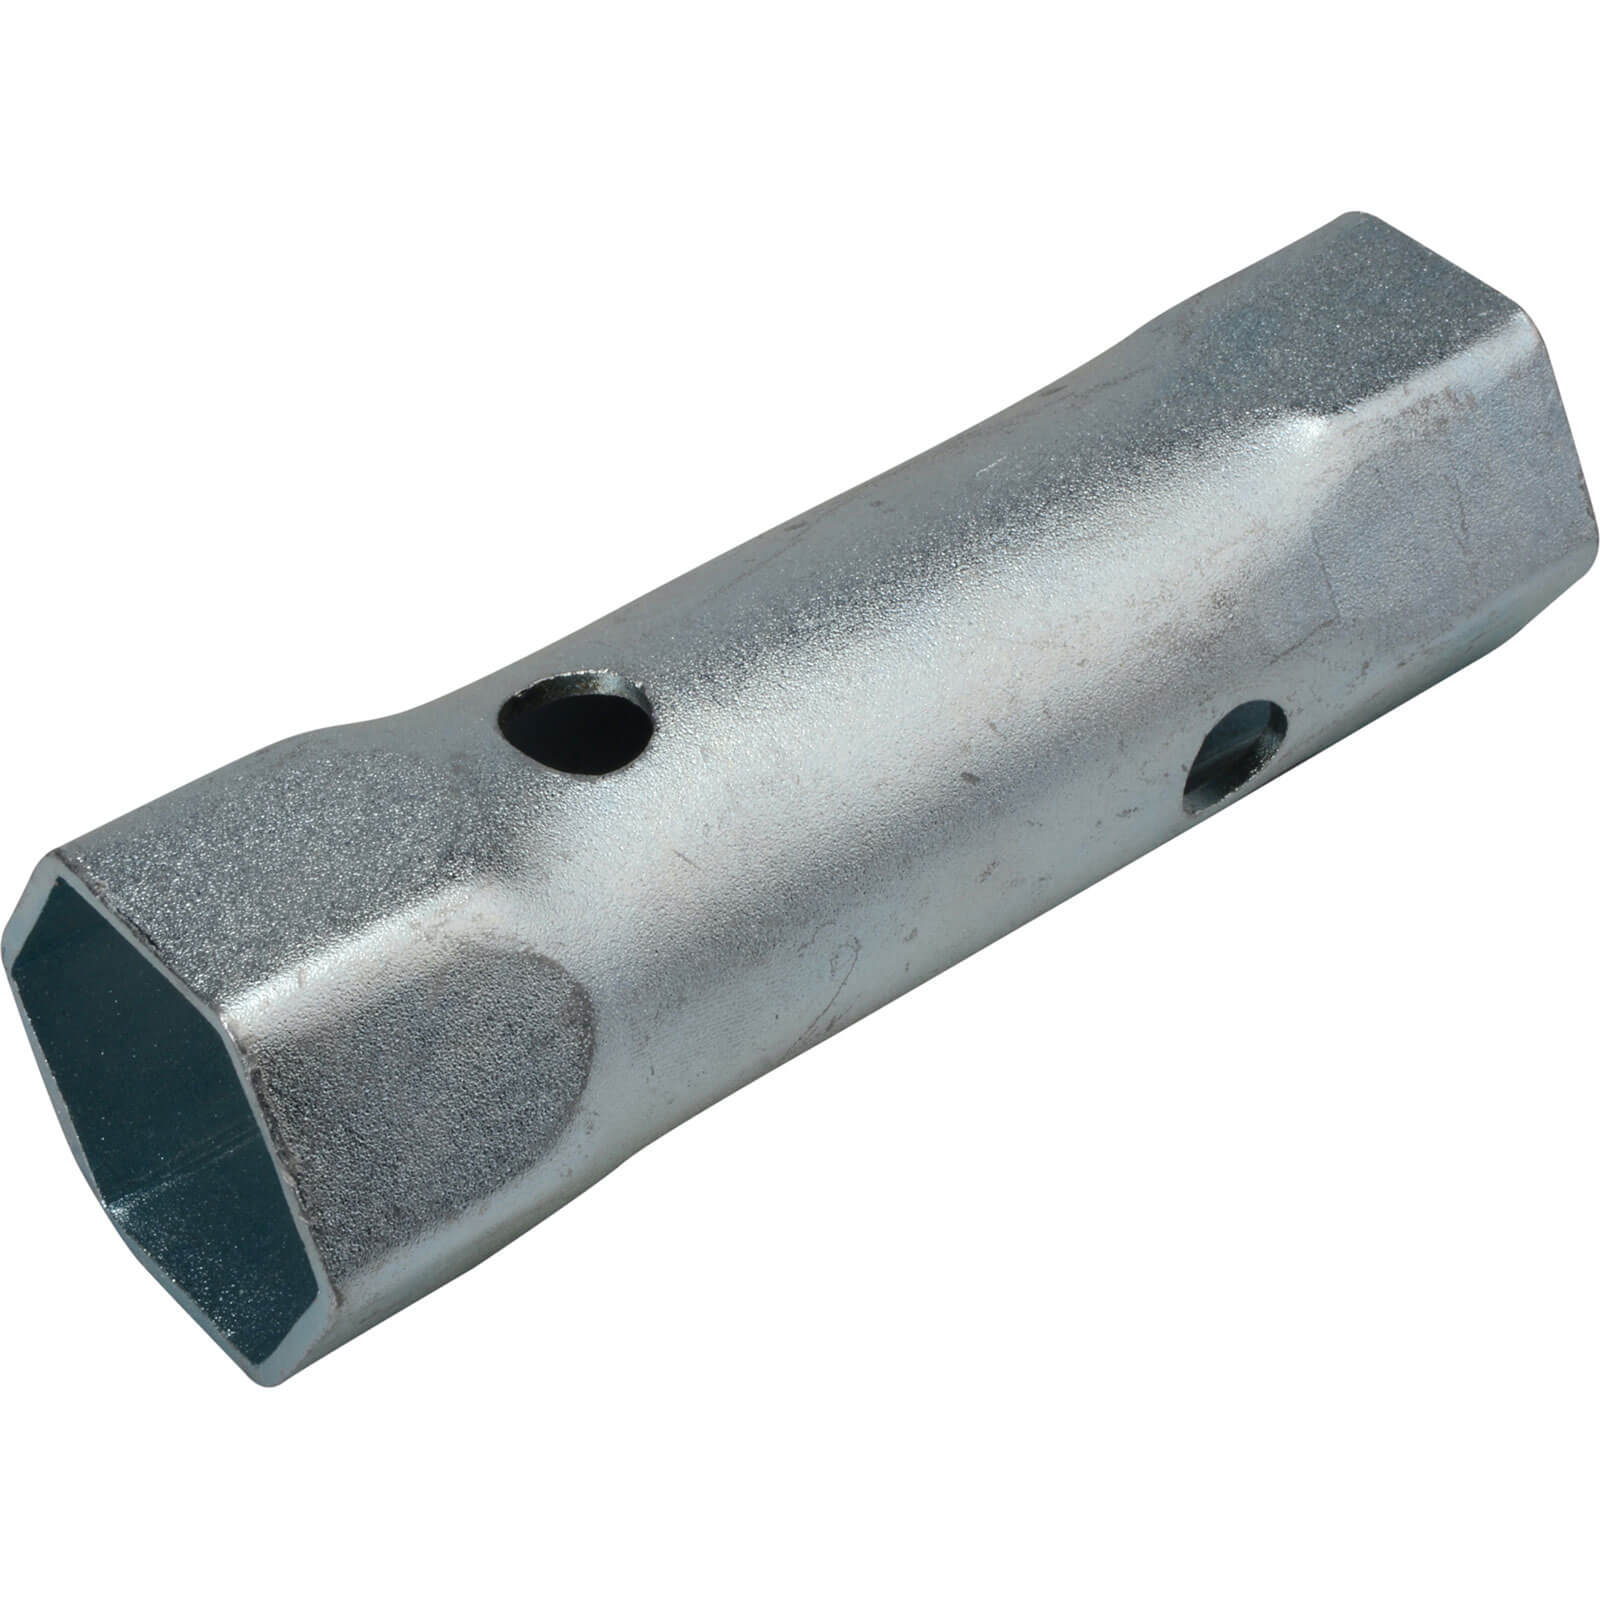 Image of Monument 308L Waste Nut Box Spanner 46mm x 50mm